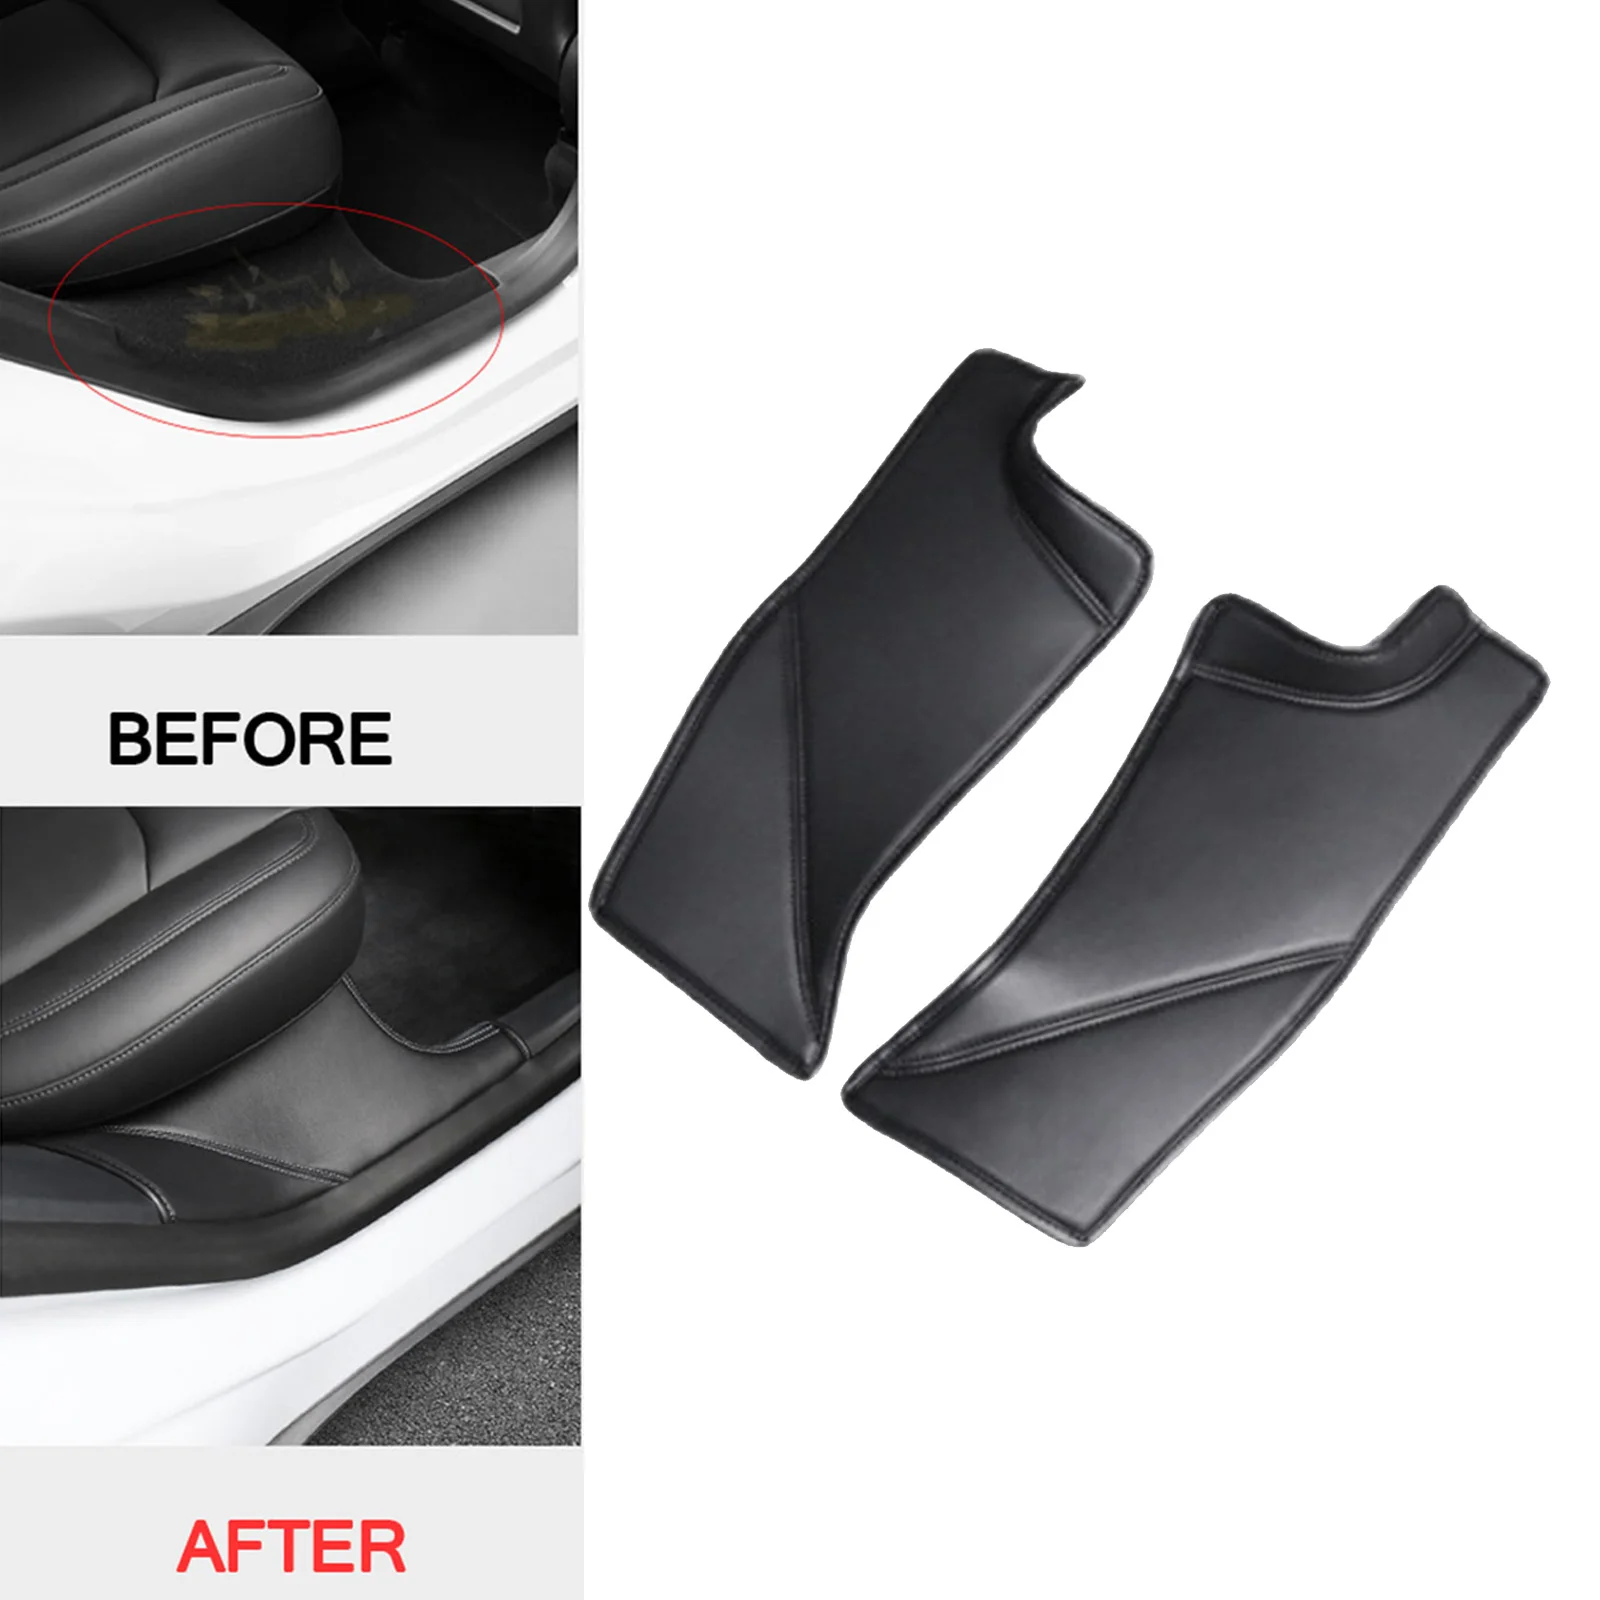 2x Car PU Leather Rear Door Sill Protector Sticker Fit for Tesla Model Y